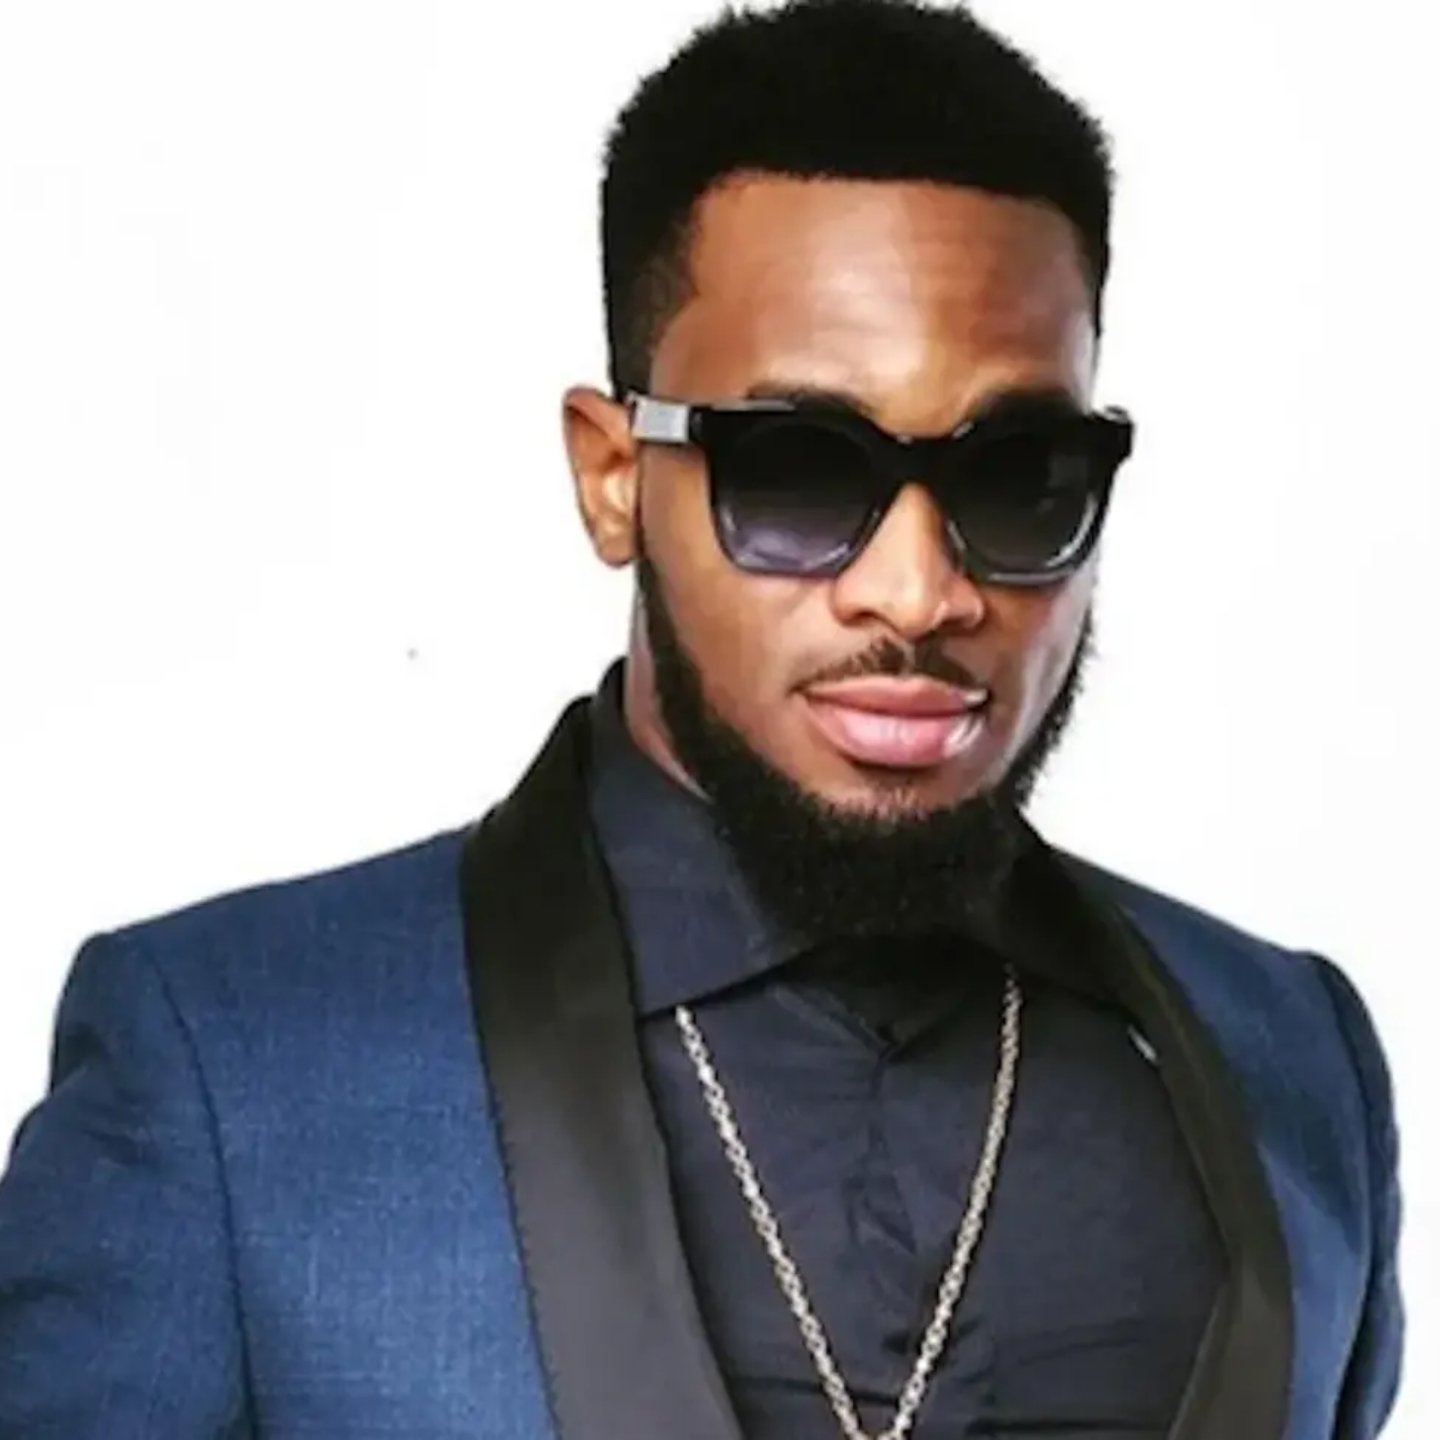 ICPC confirms detaining D’Banj in connection with claims of N-Power fraud